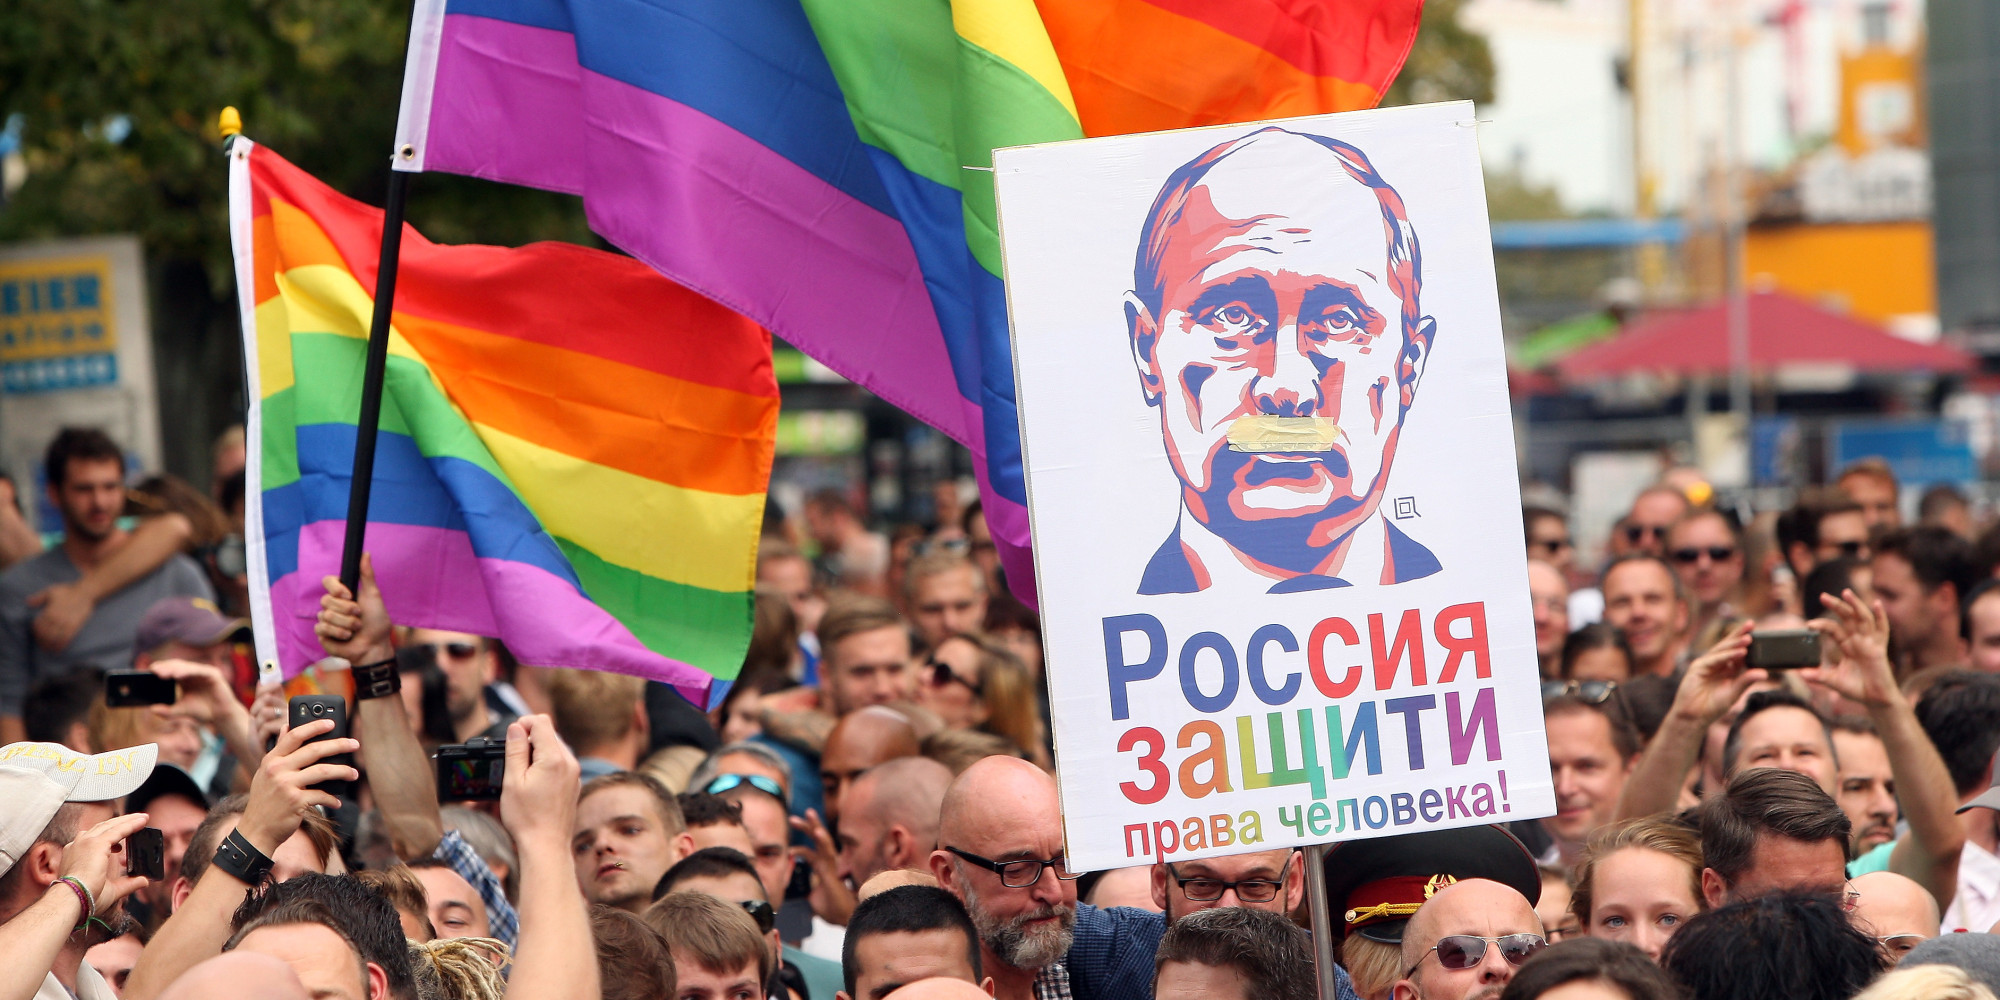 Russias Gay Laws Putins Lgbt Stance Discussed By Activists At Davos Panel Huffpost